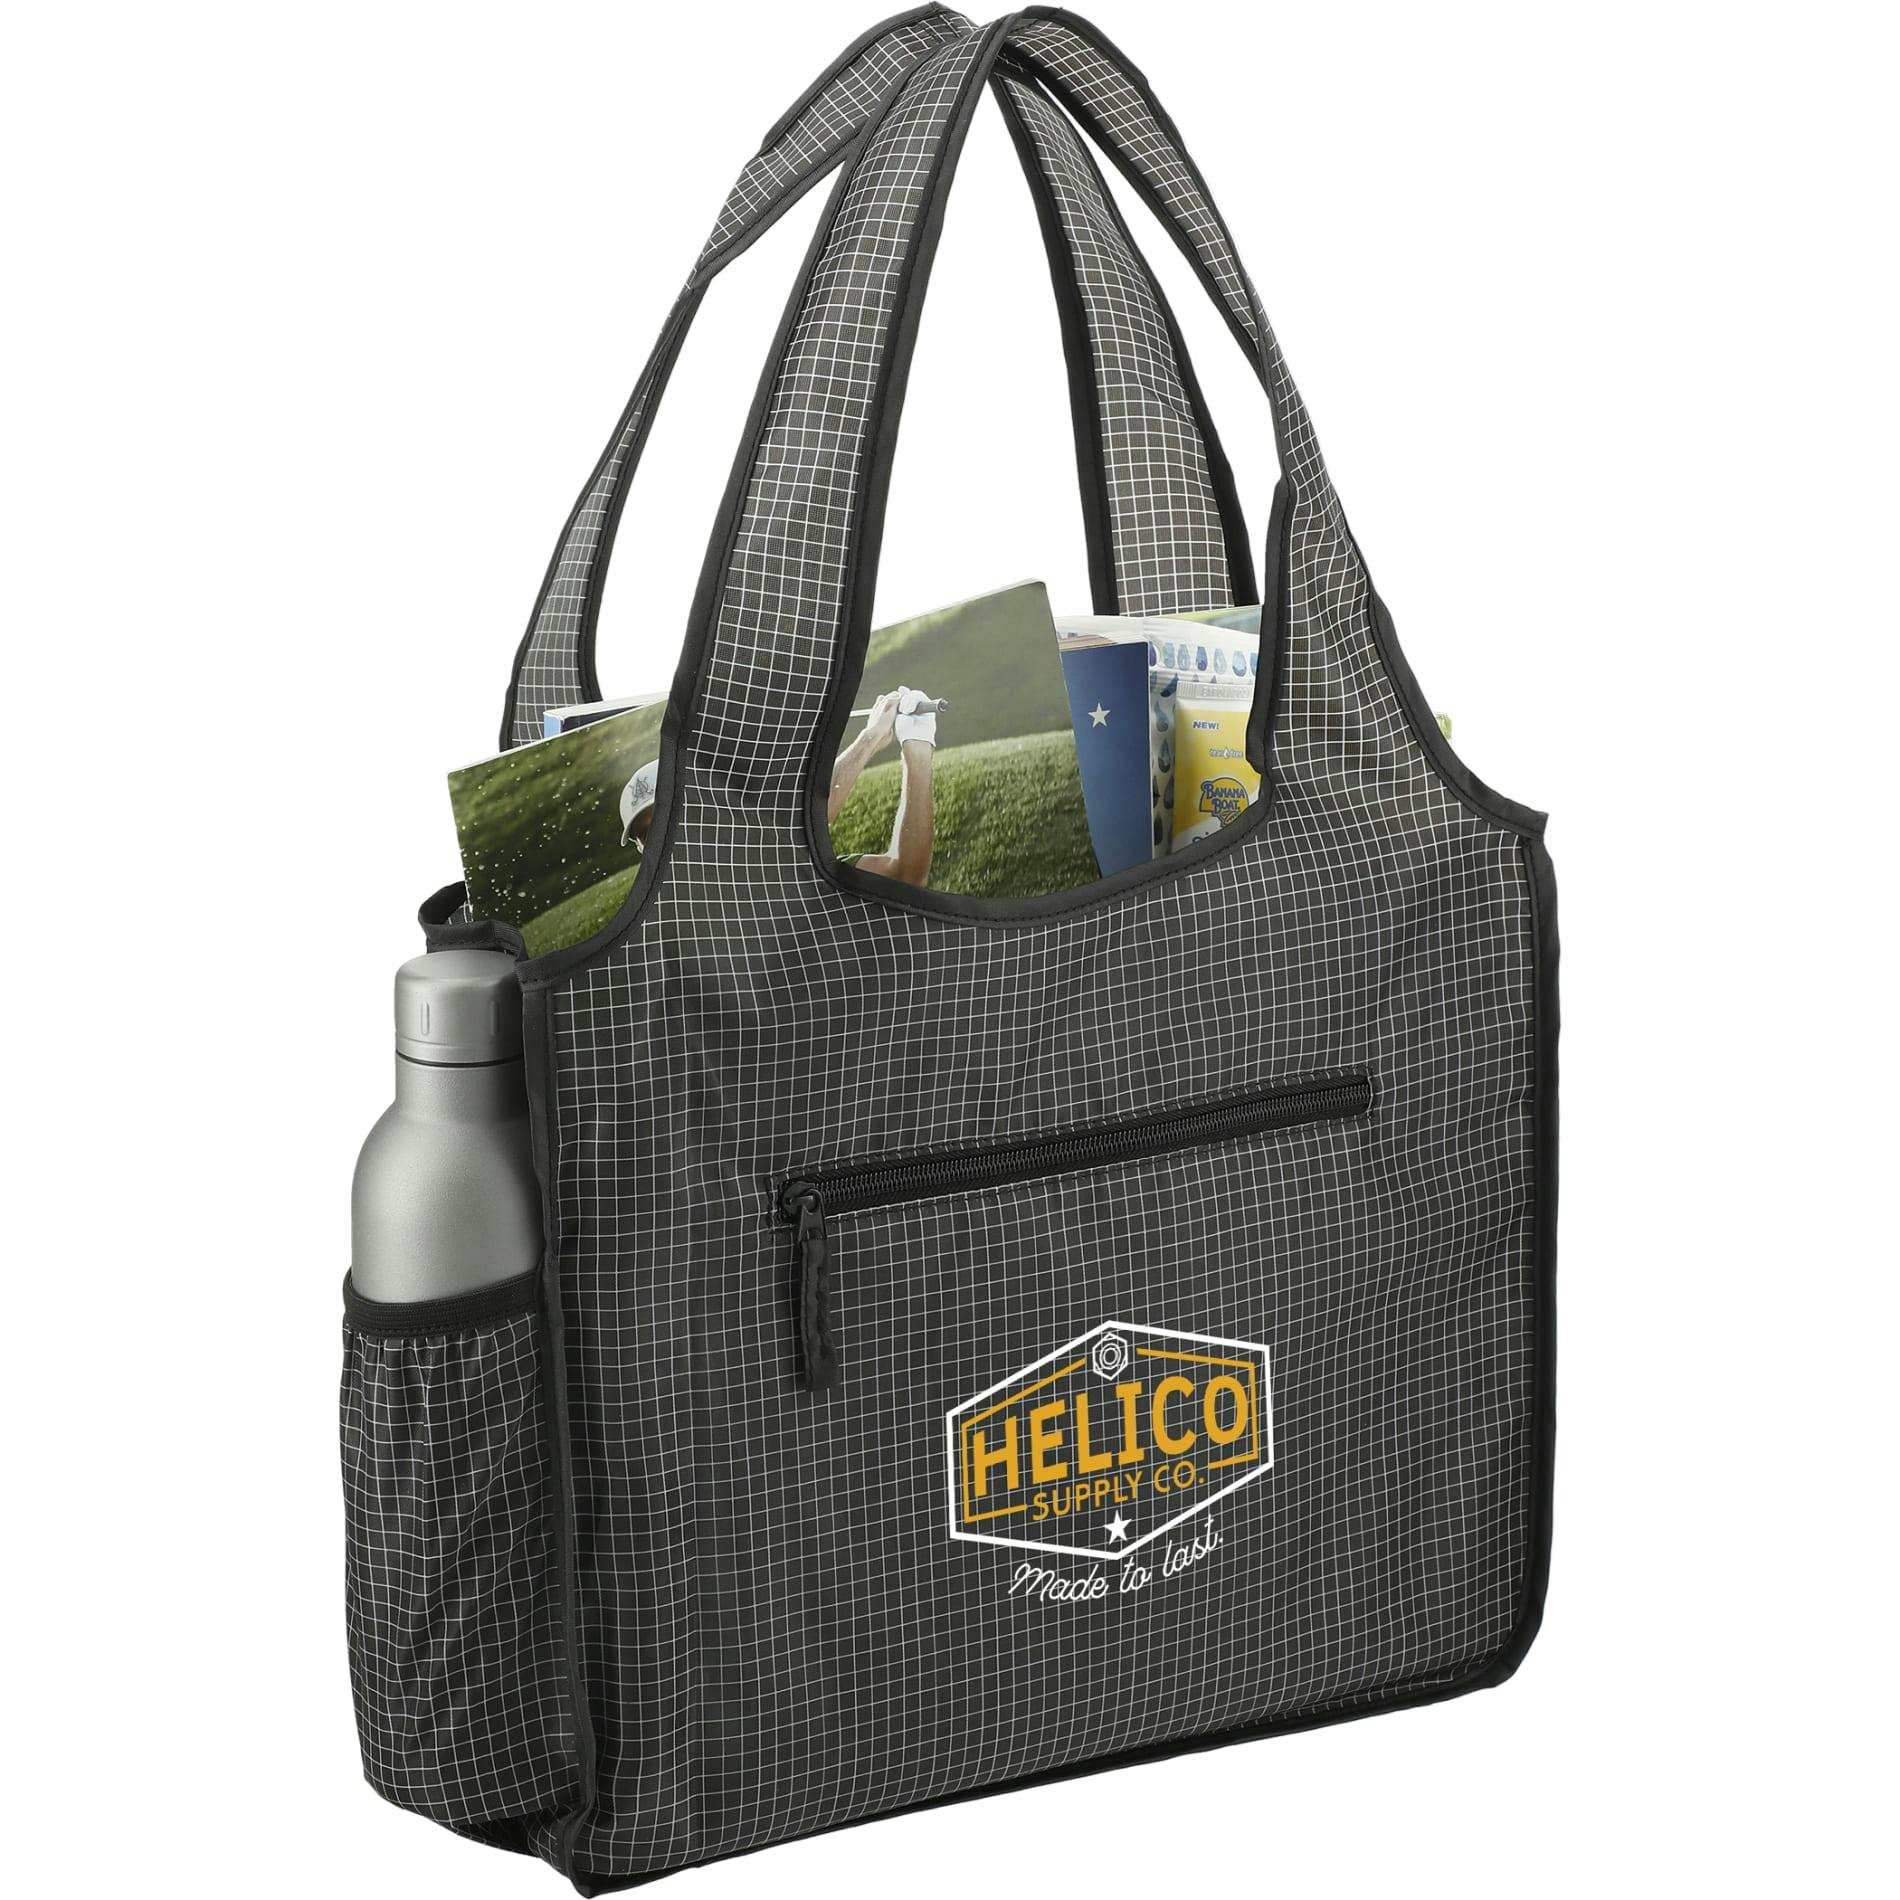 Grid Bungalow Tote - additional Image 1